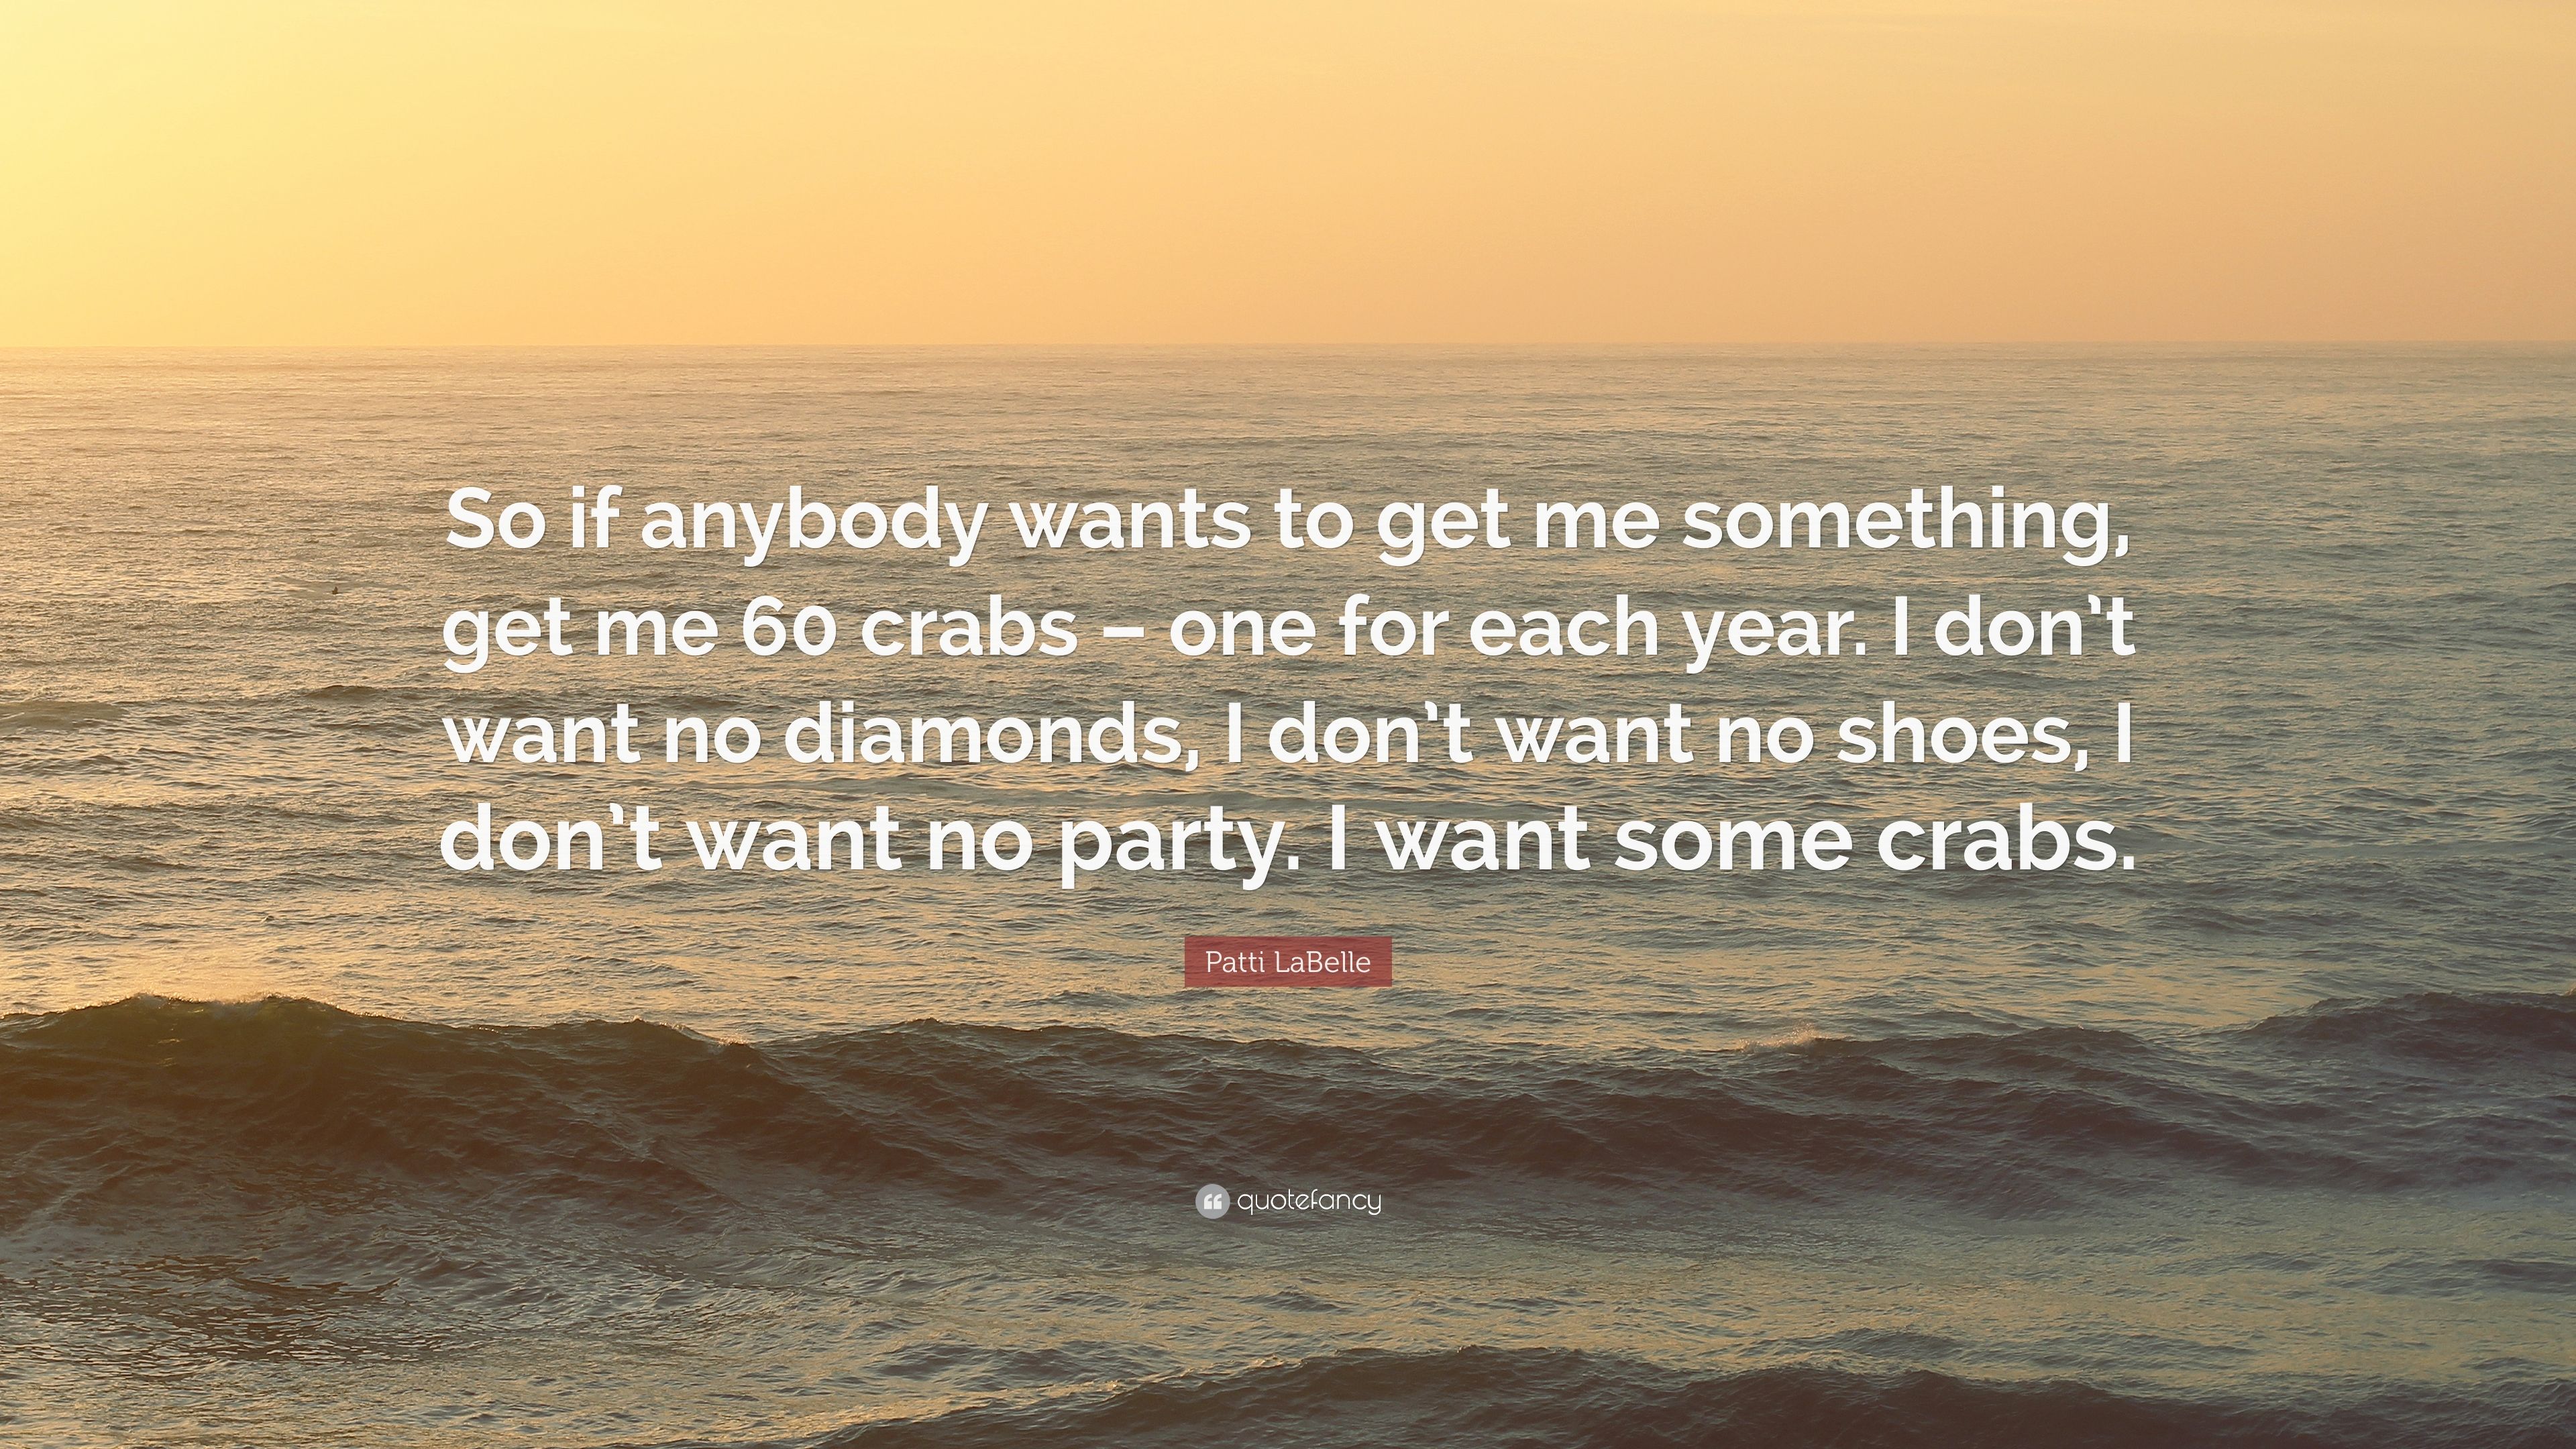 Patti LaBelle Quote: “So if anybody wants to get me something, get